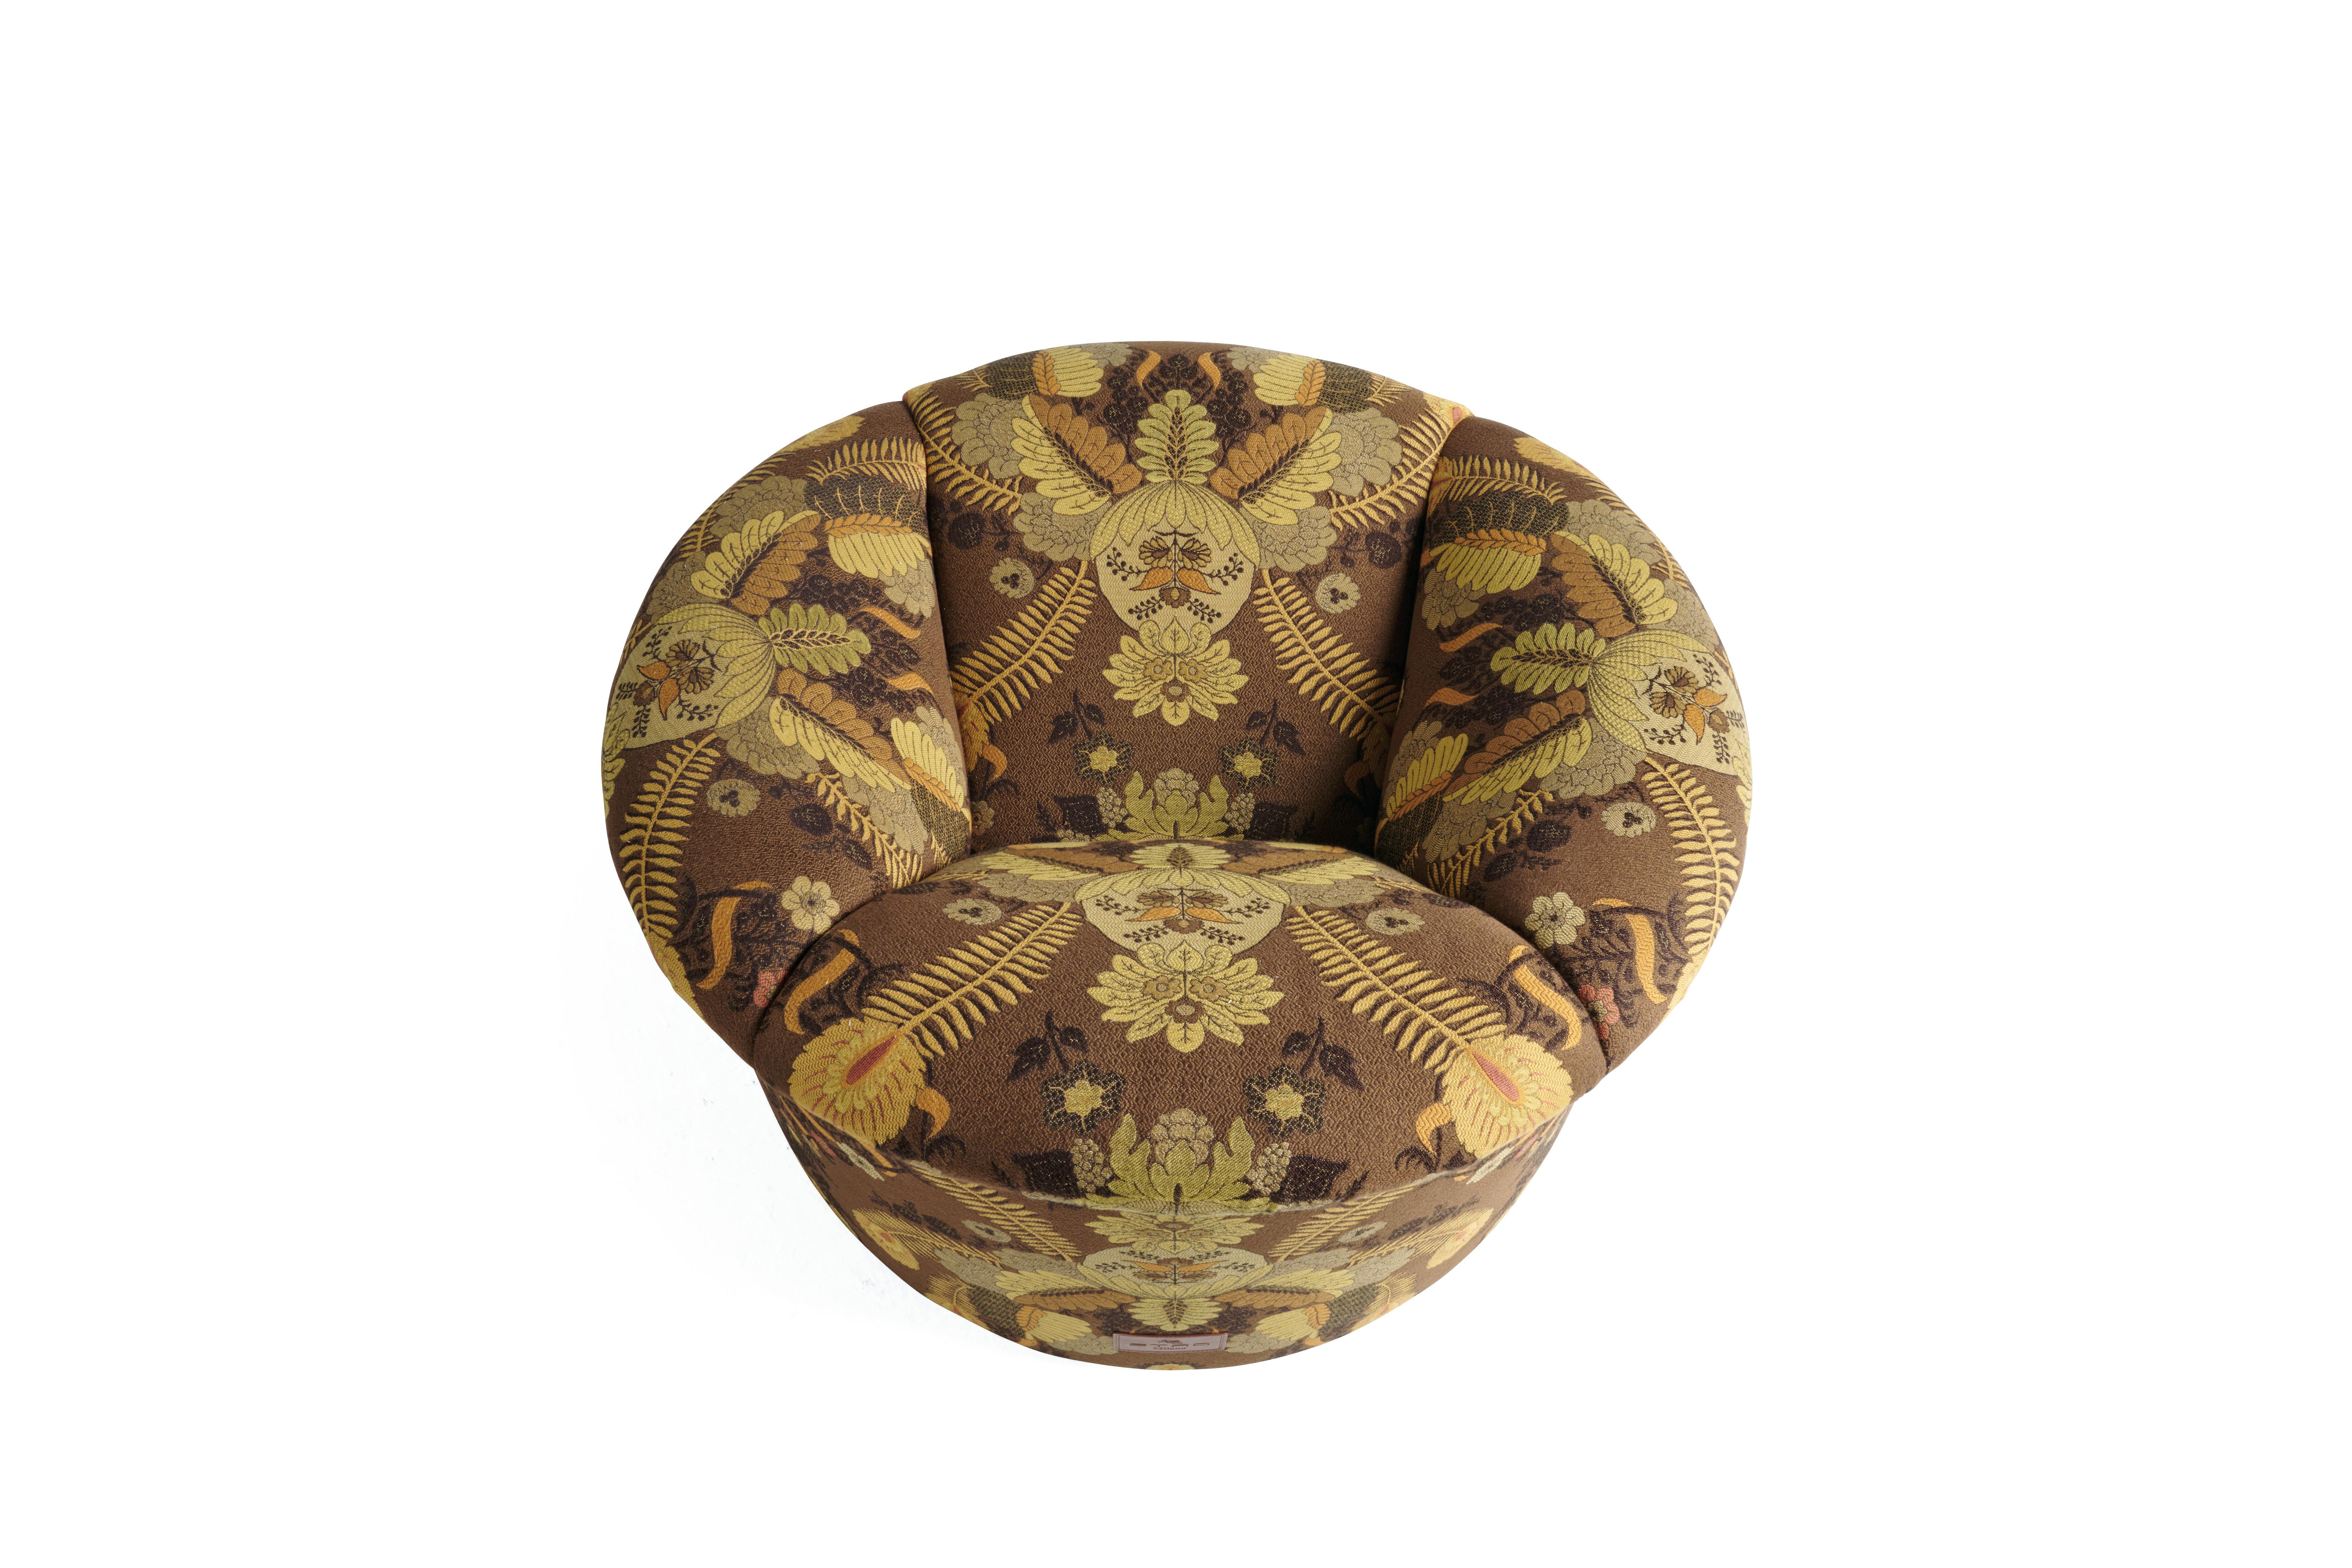 Modern 21st Century Dahlia Armchair in Brown Jacquard Fabric by Etro Home Interiors For Sale